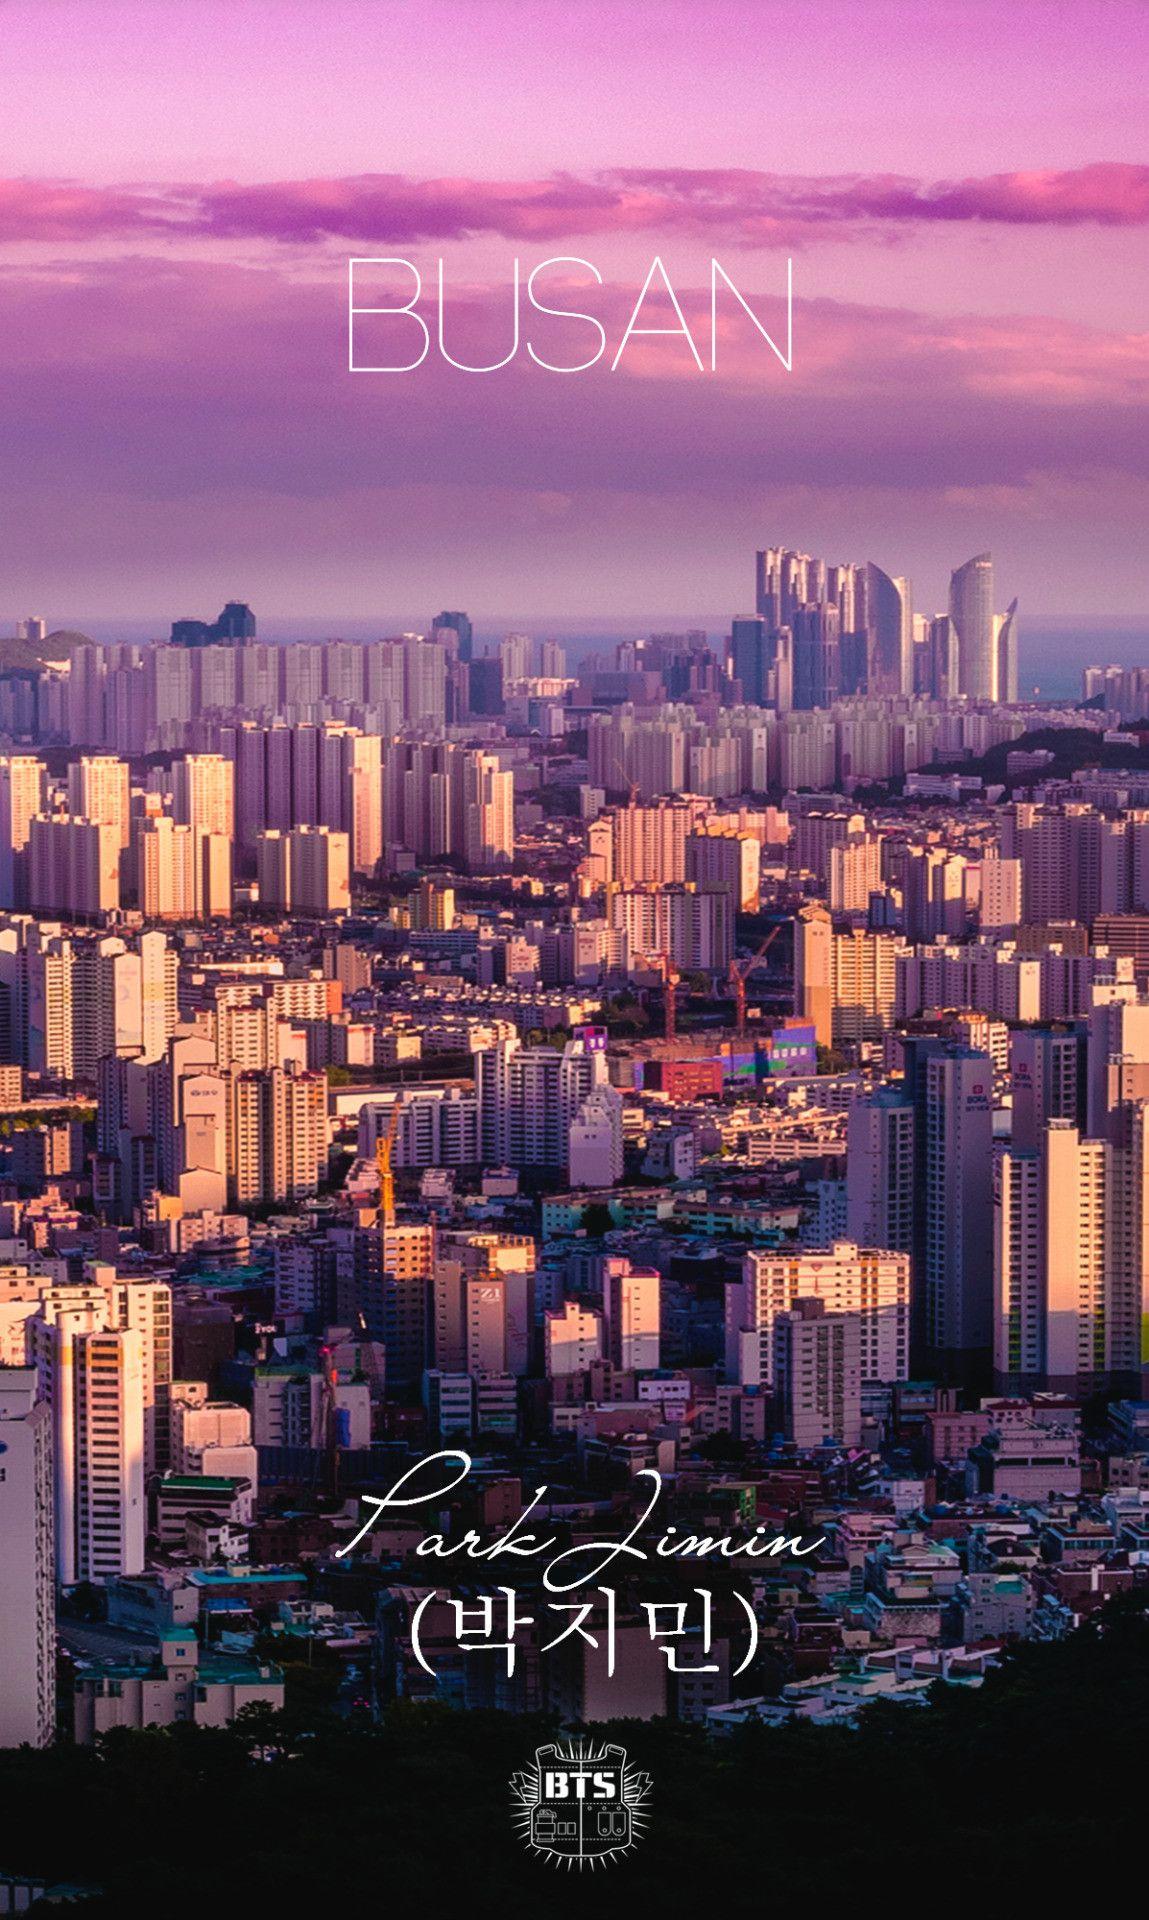 Seoul Phone Wallpapers - Top Free Seoul Phone Backgrounds - WallpaperAccess